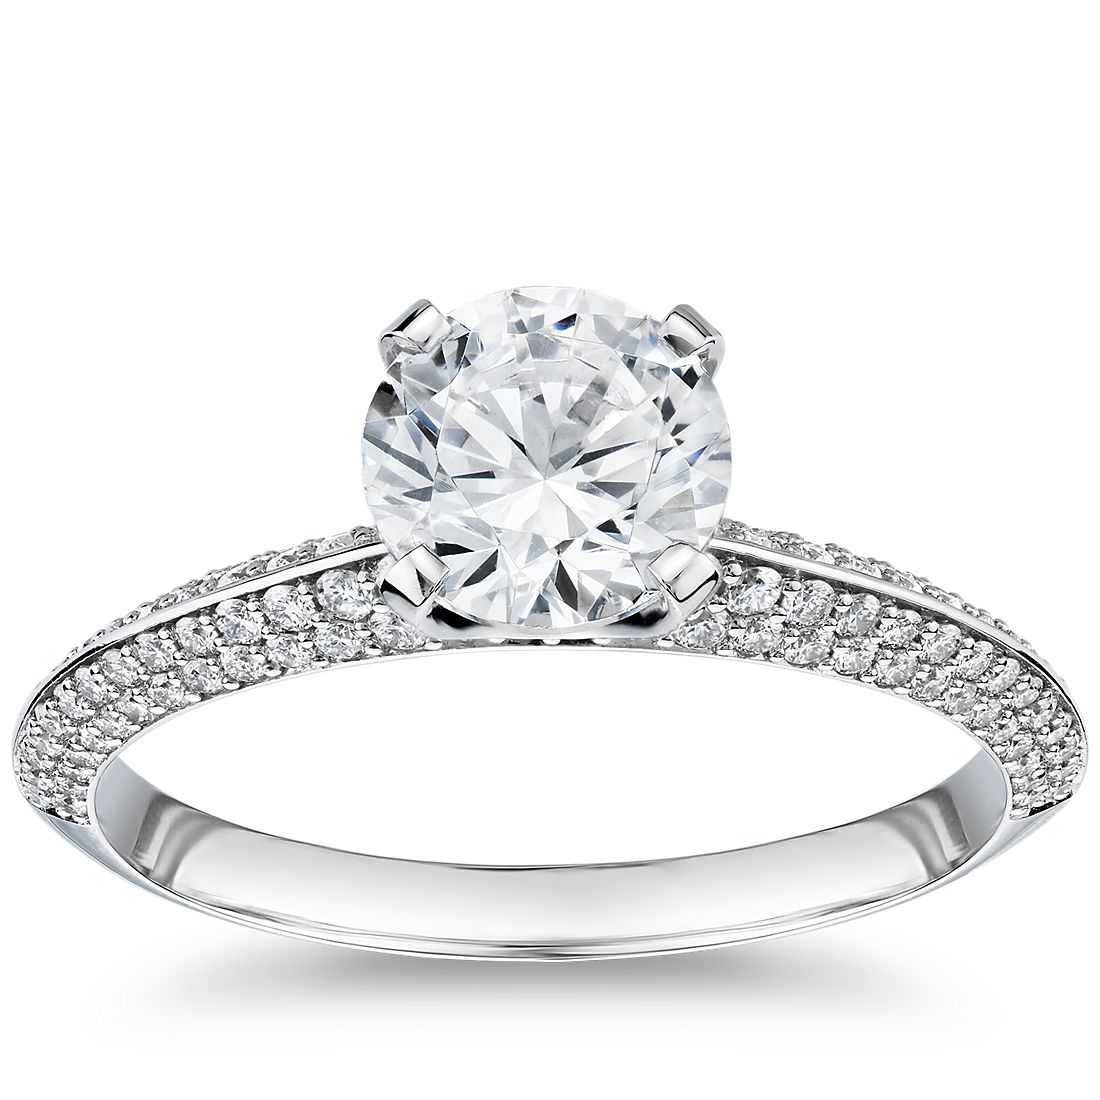 An engagement ring with a single 1-carat diamond and a knife-edge band with rows of micro pavé diamonds.